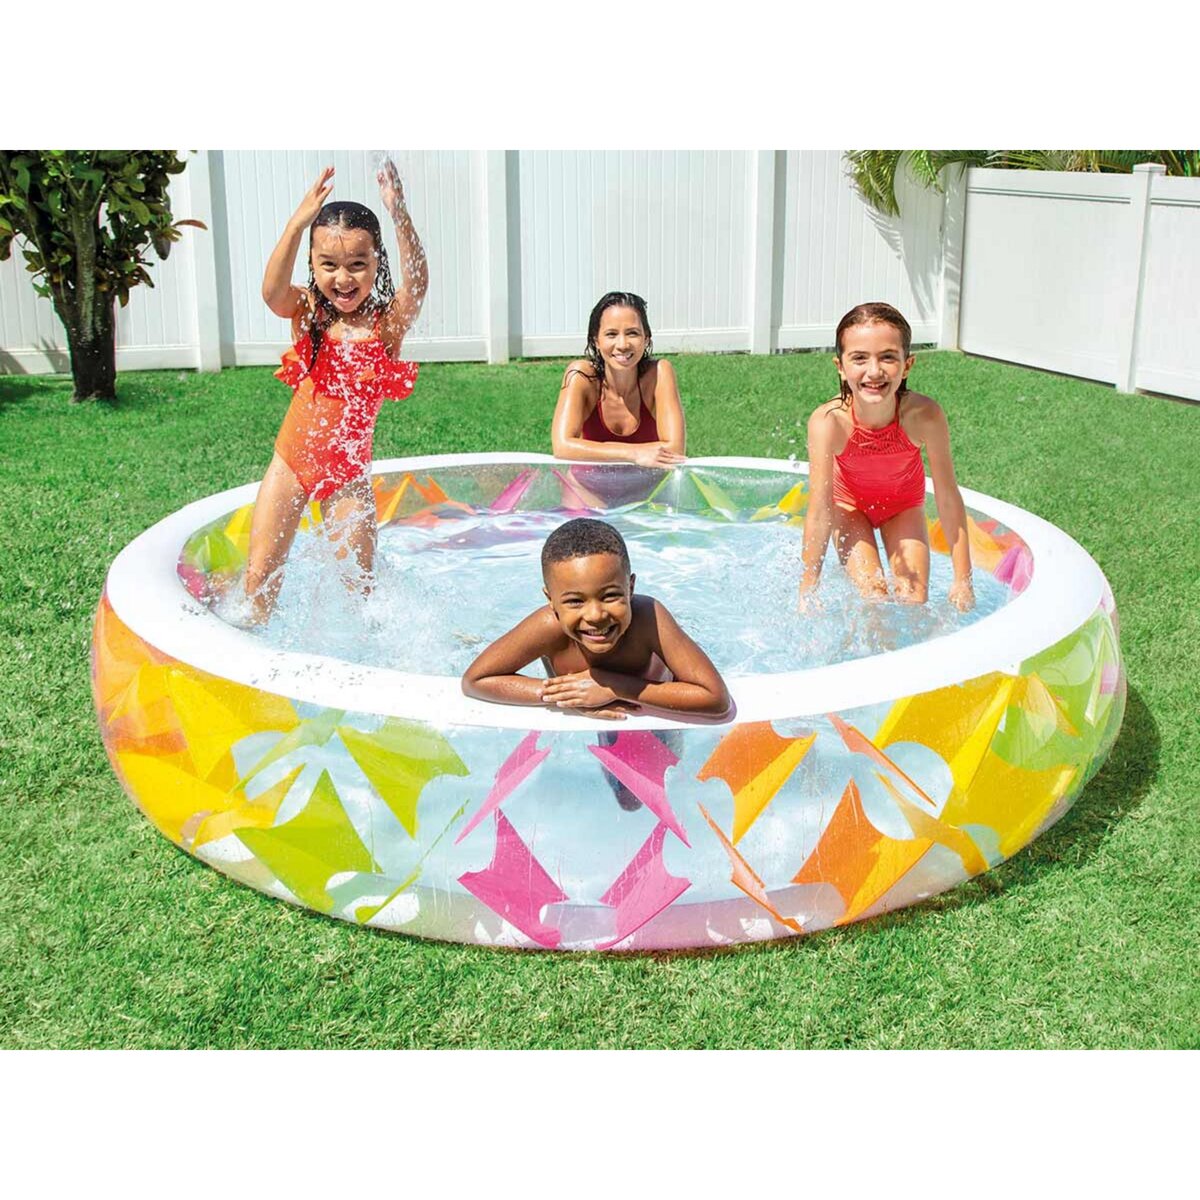 INTEX Piscine gonflable Croisillons - Intex